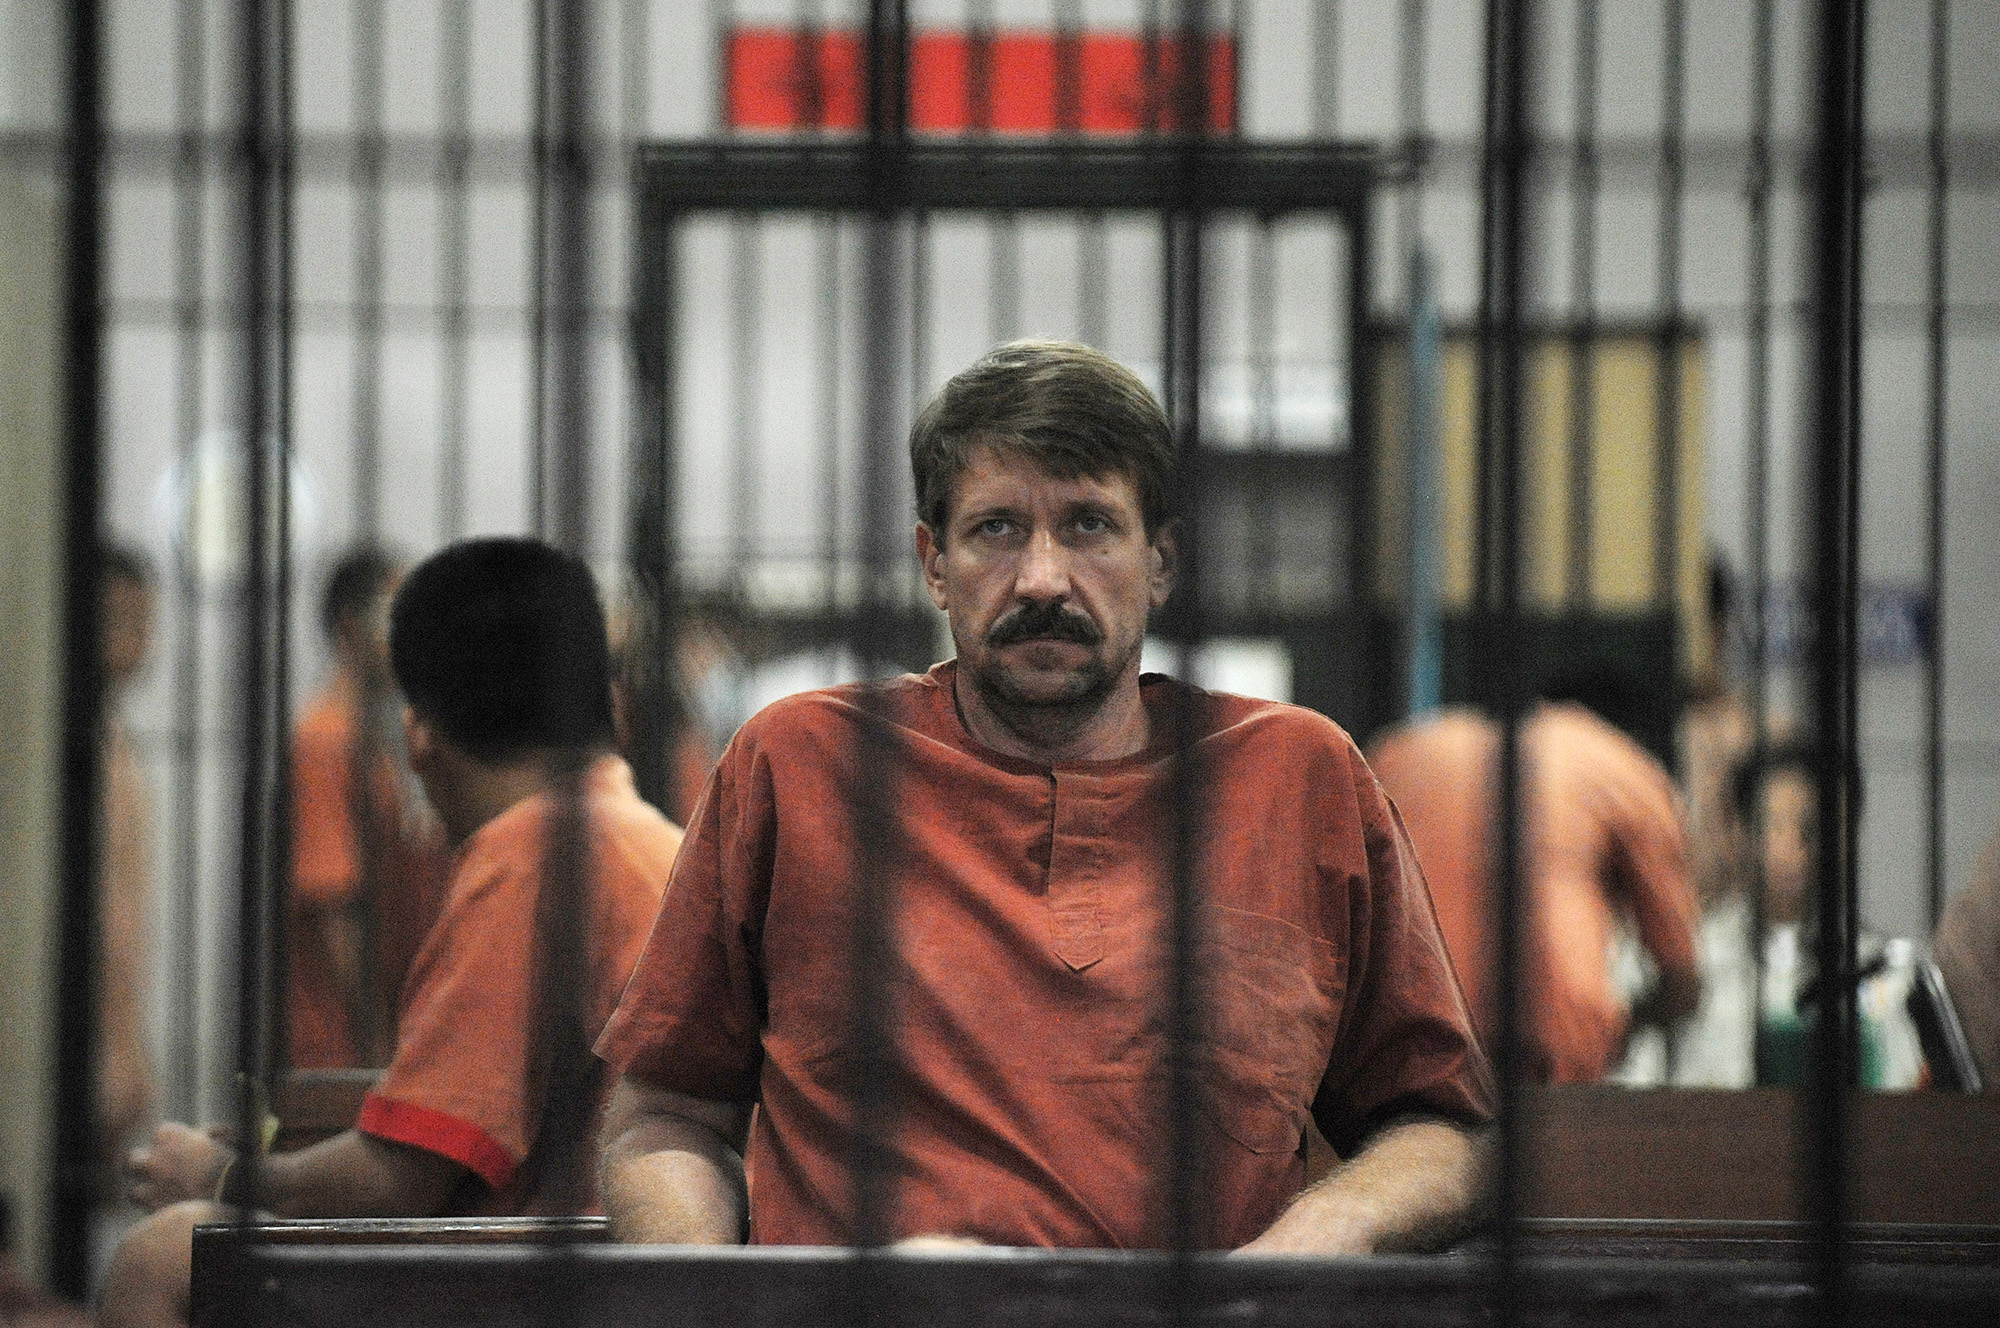 Alleged Russian arms dealer Viktor Bout sits in a temporary cell ahead of a hearing at the Criminal Court in Bangkok, Thailand, on August 20, 2010.